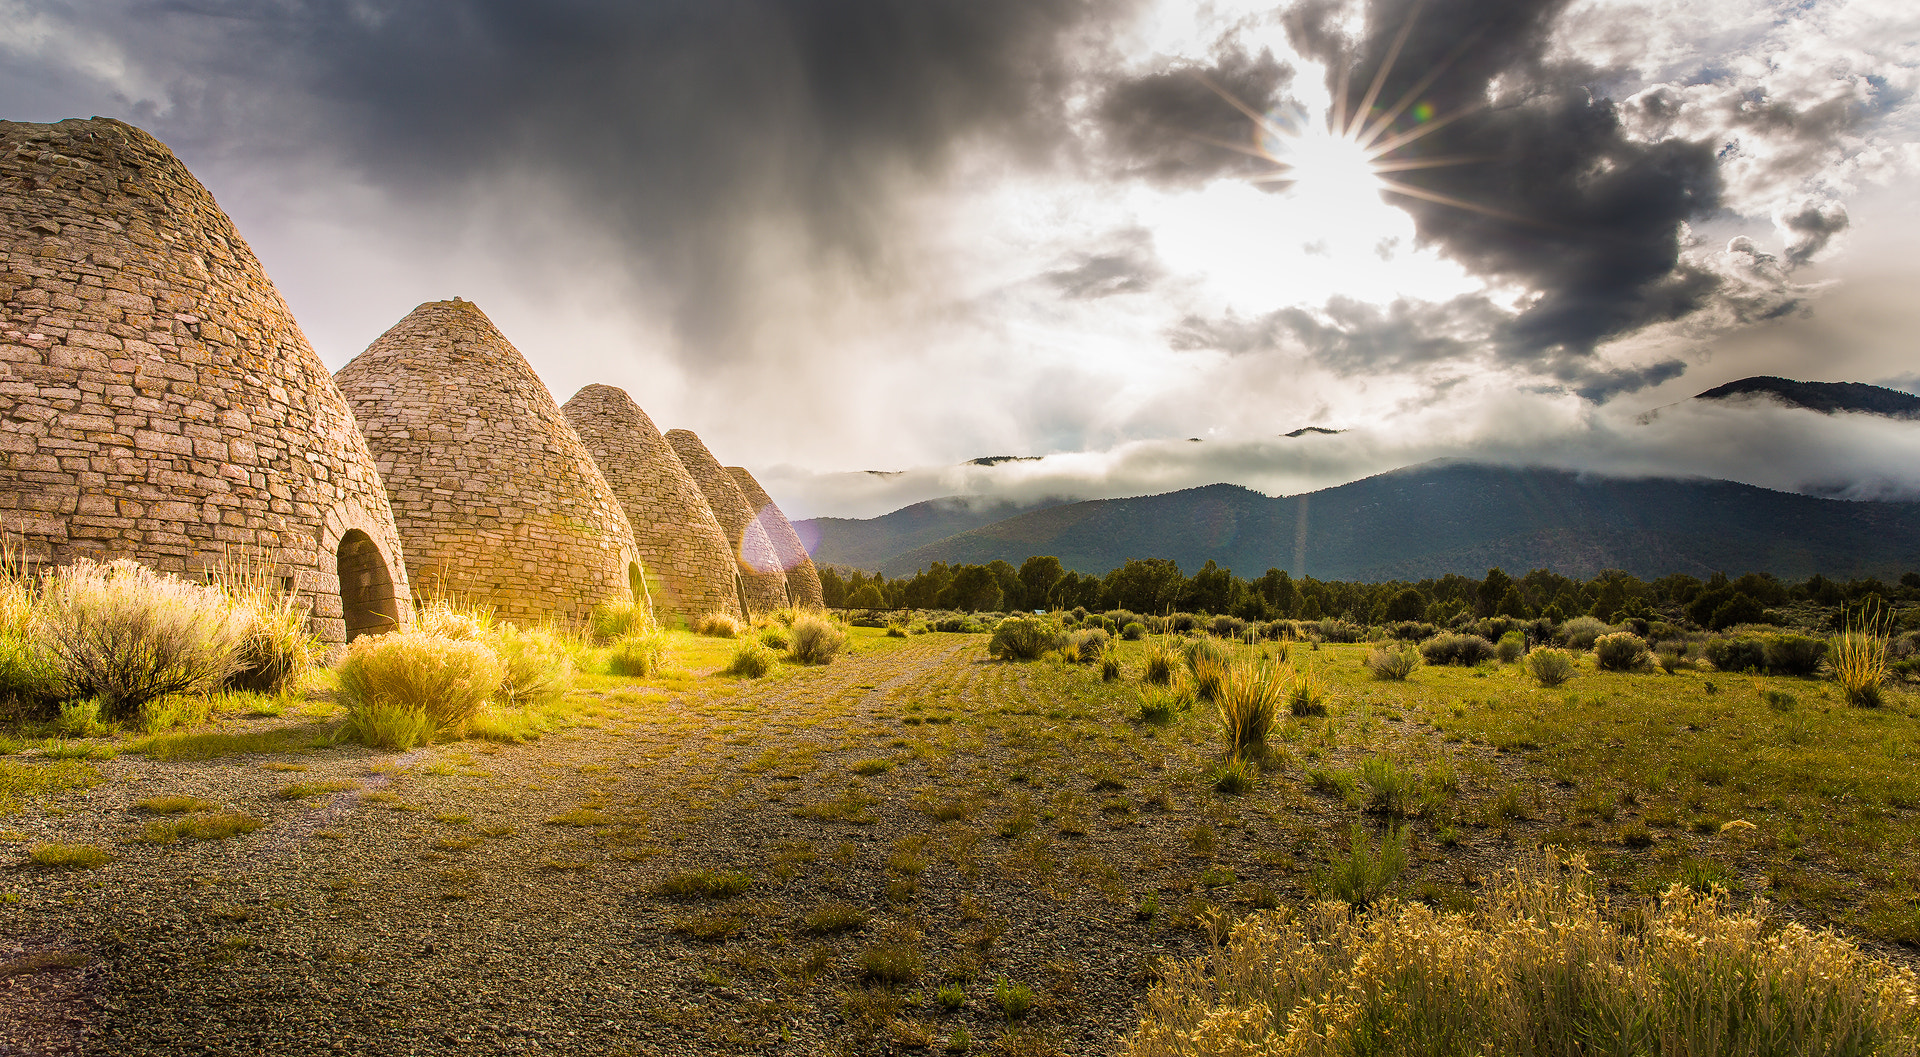 Stormy Afternoon - Ward Charcoal Ovens, NV